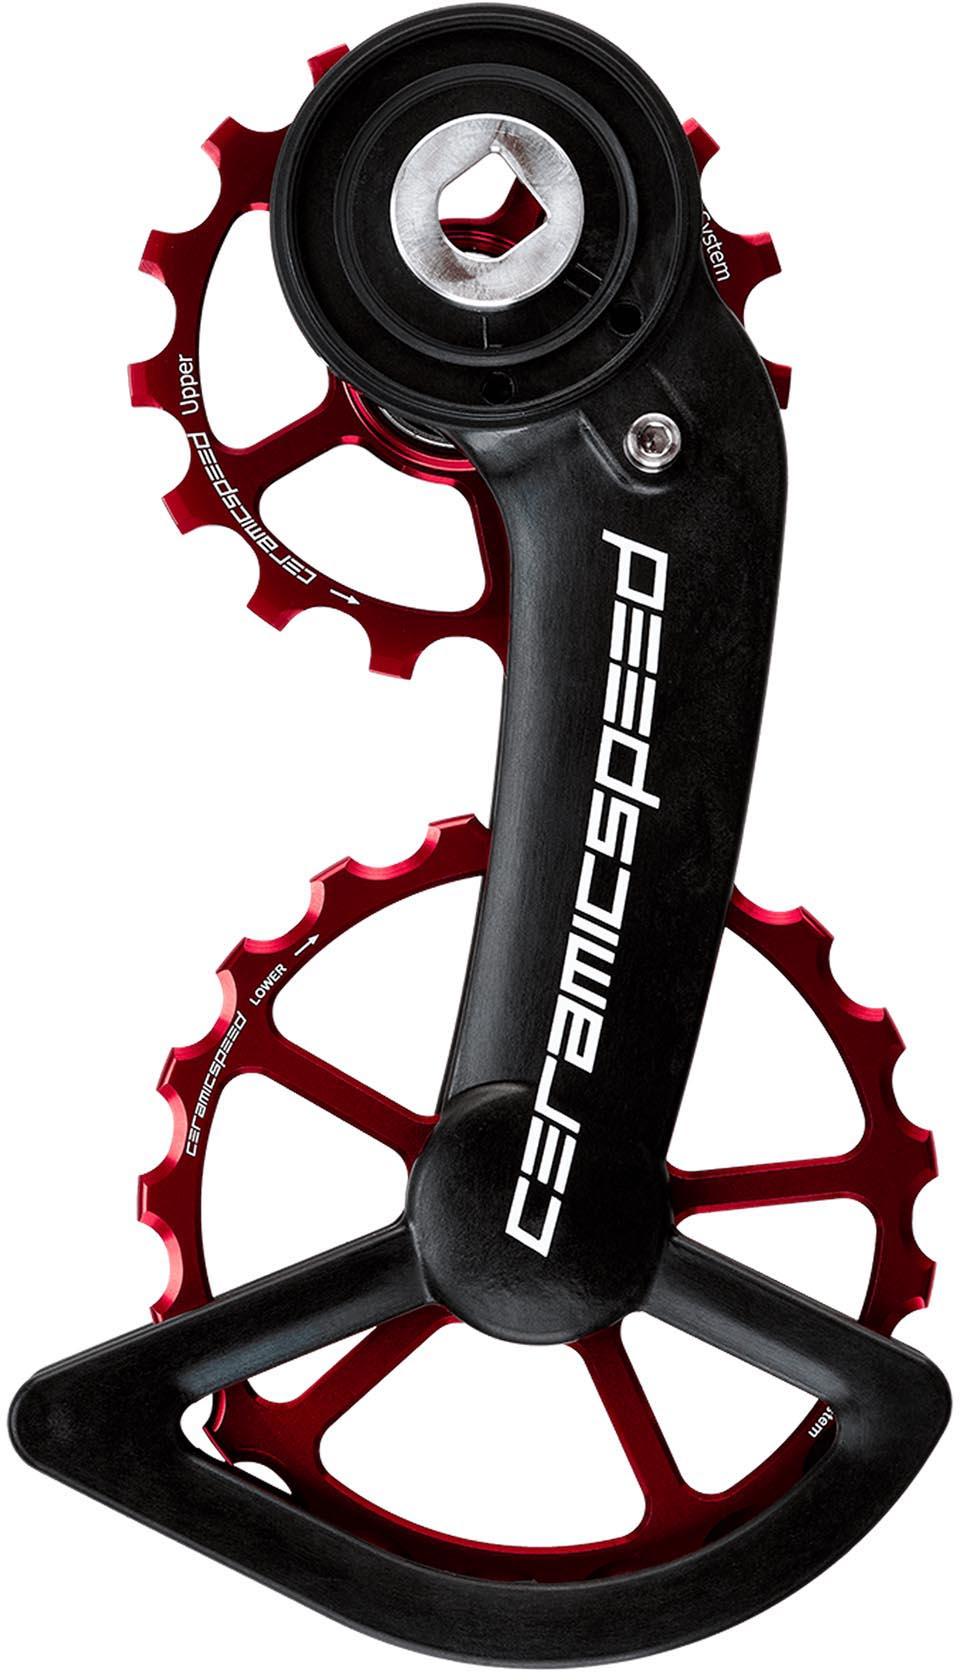 Ceramicspeed Ospw Sram Red And Force Axs